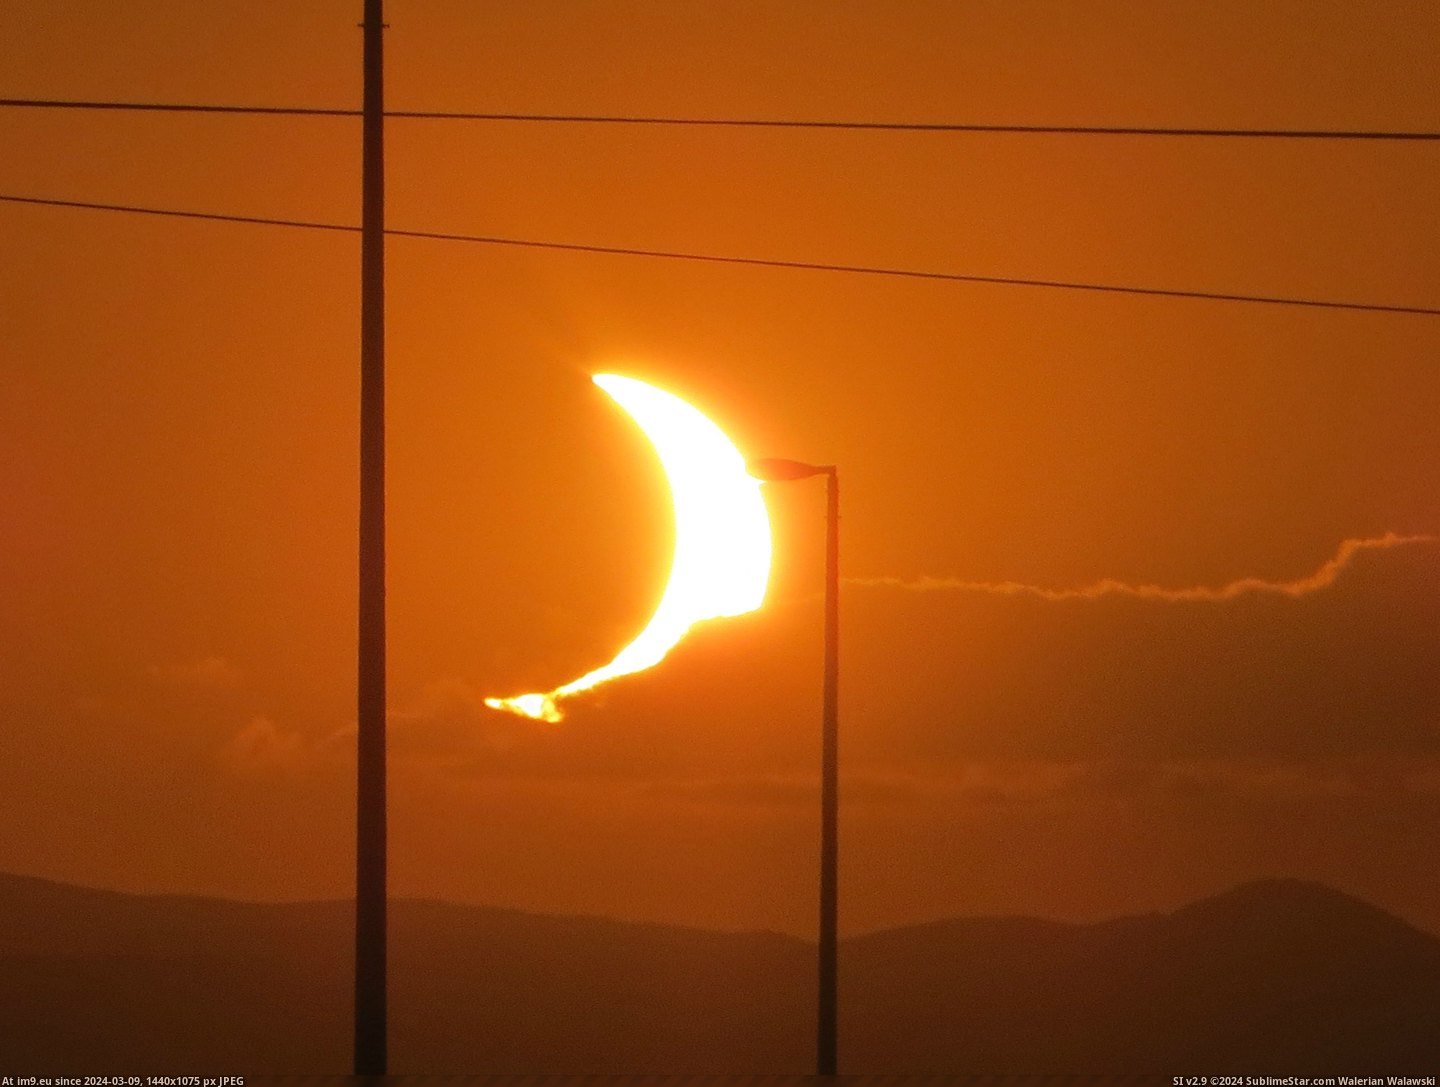 #Africa #Djibouti #Eclipse [Pics] Today's eclipse as seen from Djibouti, Africa. Pic. (Изображение из альбом My r/PICS favs))